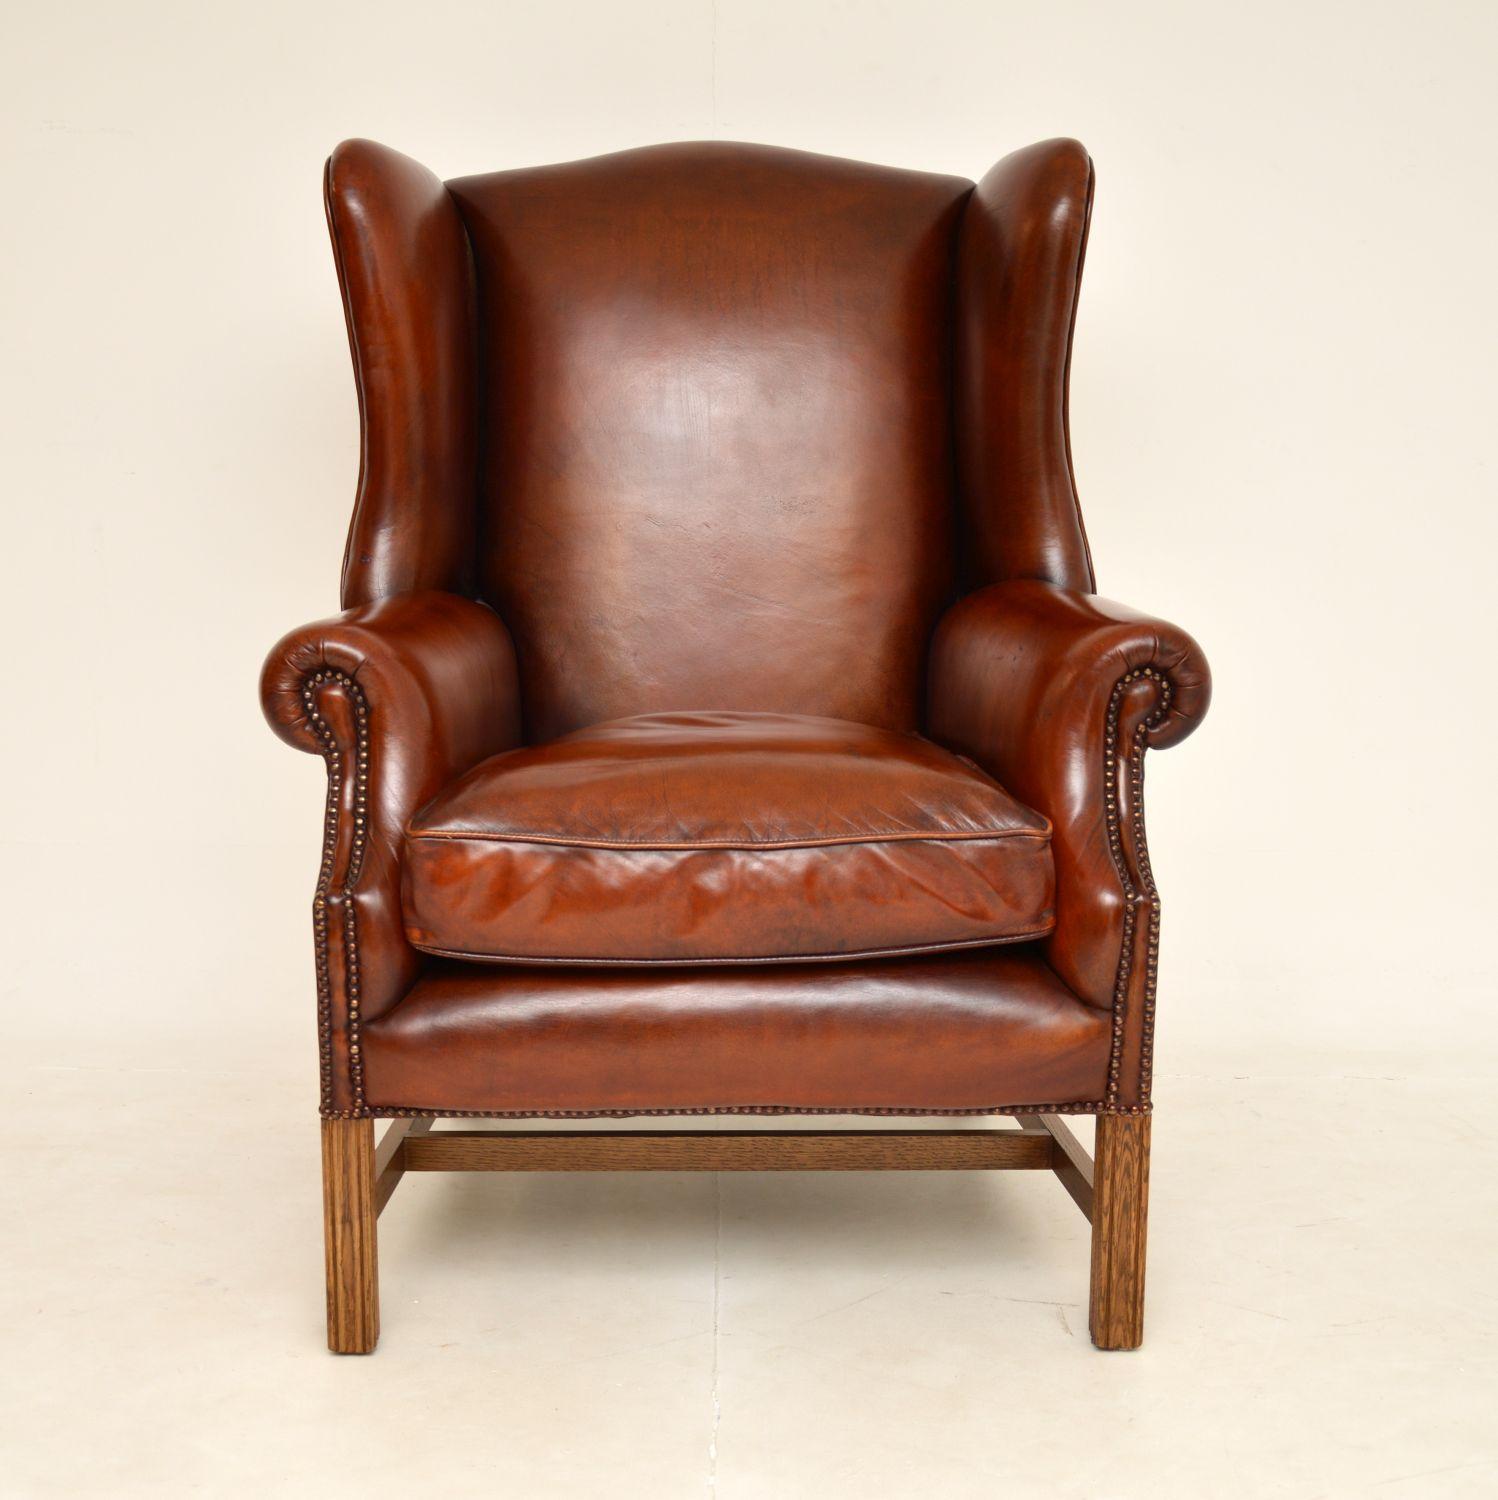 A very large and extremely comfortable antique leather wing back armchair in the Georgian style. This was made in England, it dates from around the 1950’s.

This is of very generous proportions and is most impressive. The quality is outstanding, the